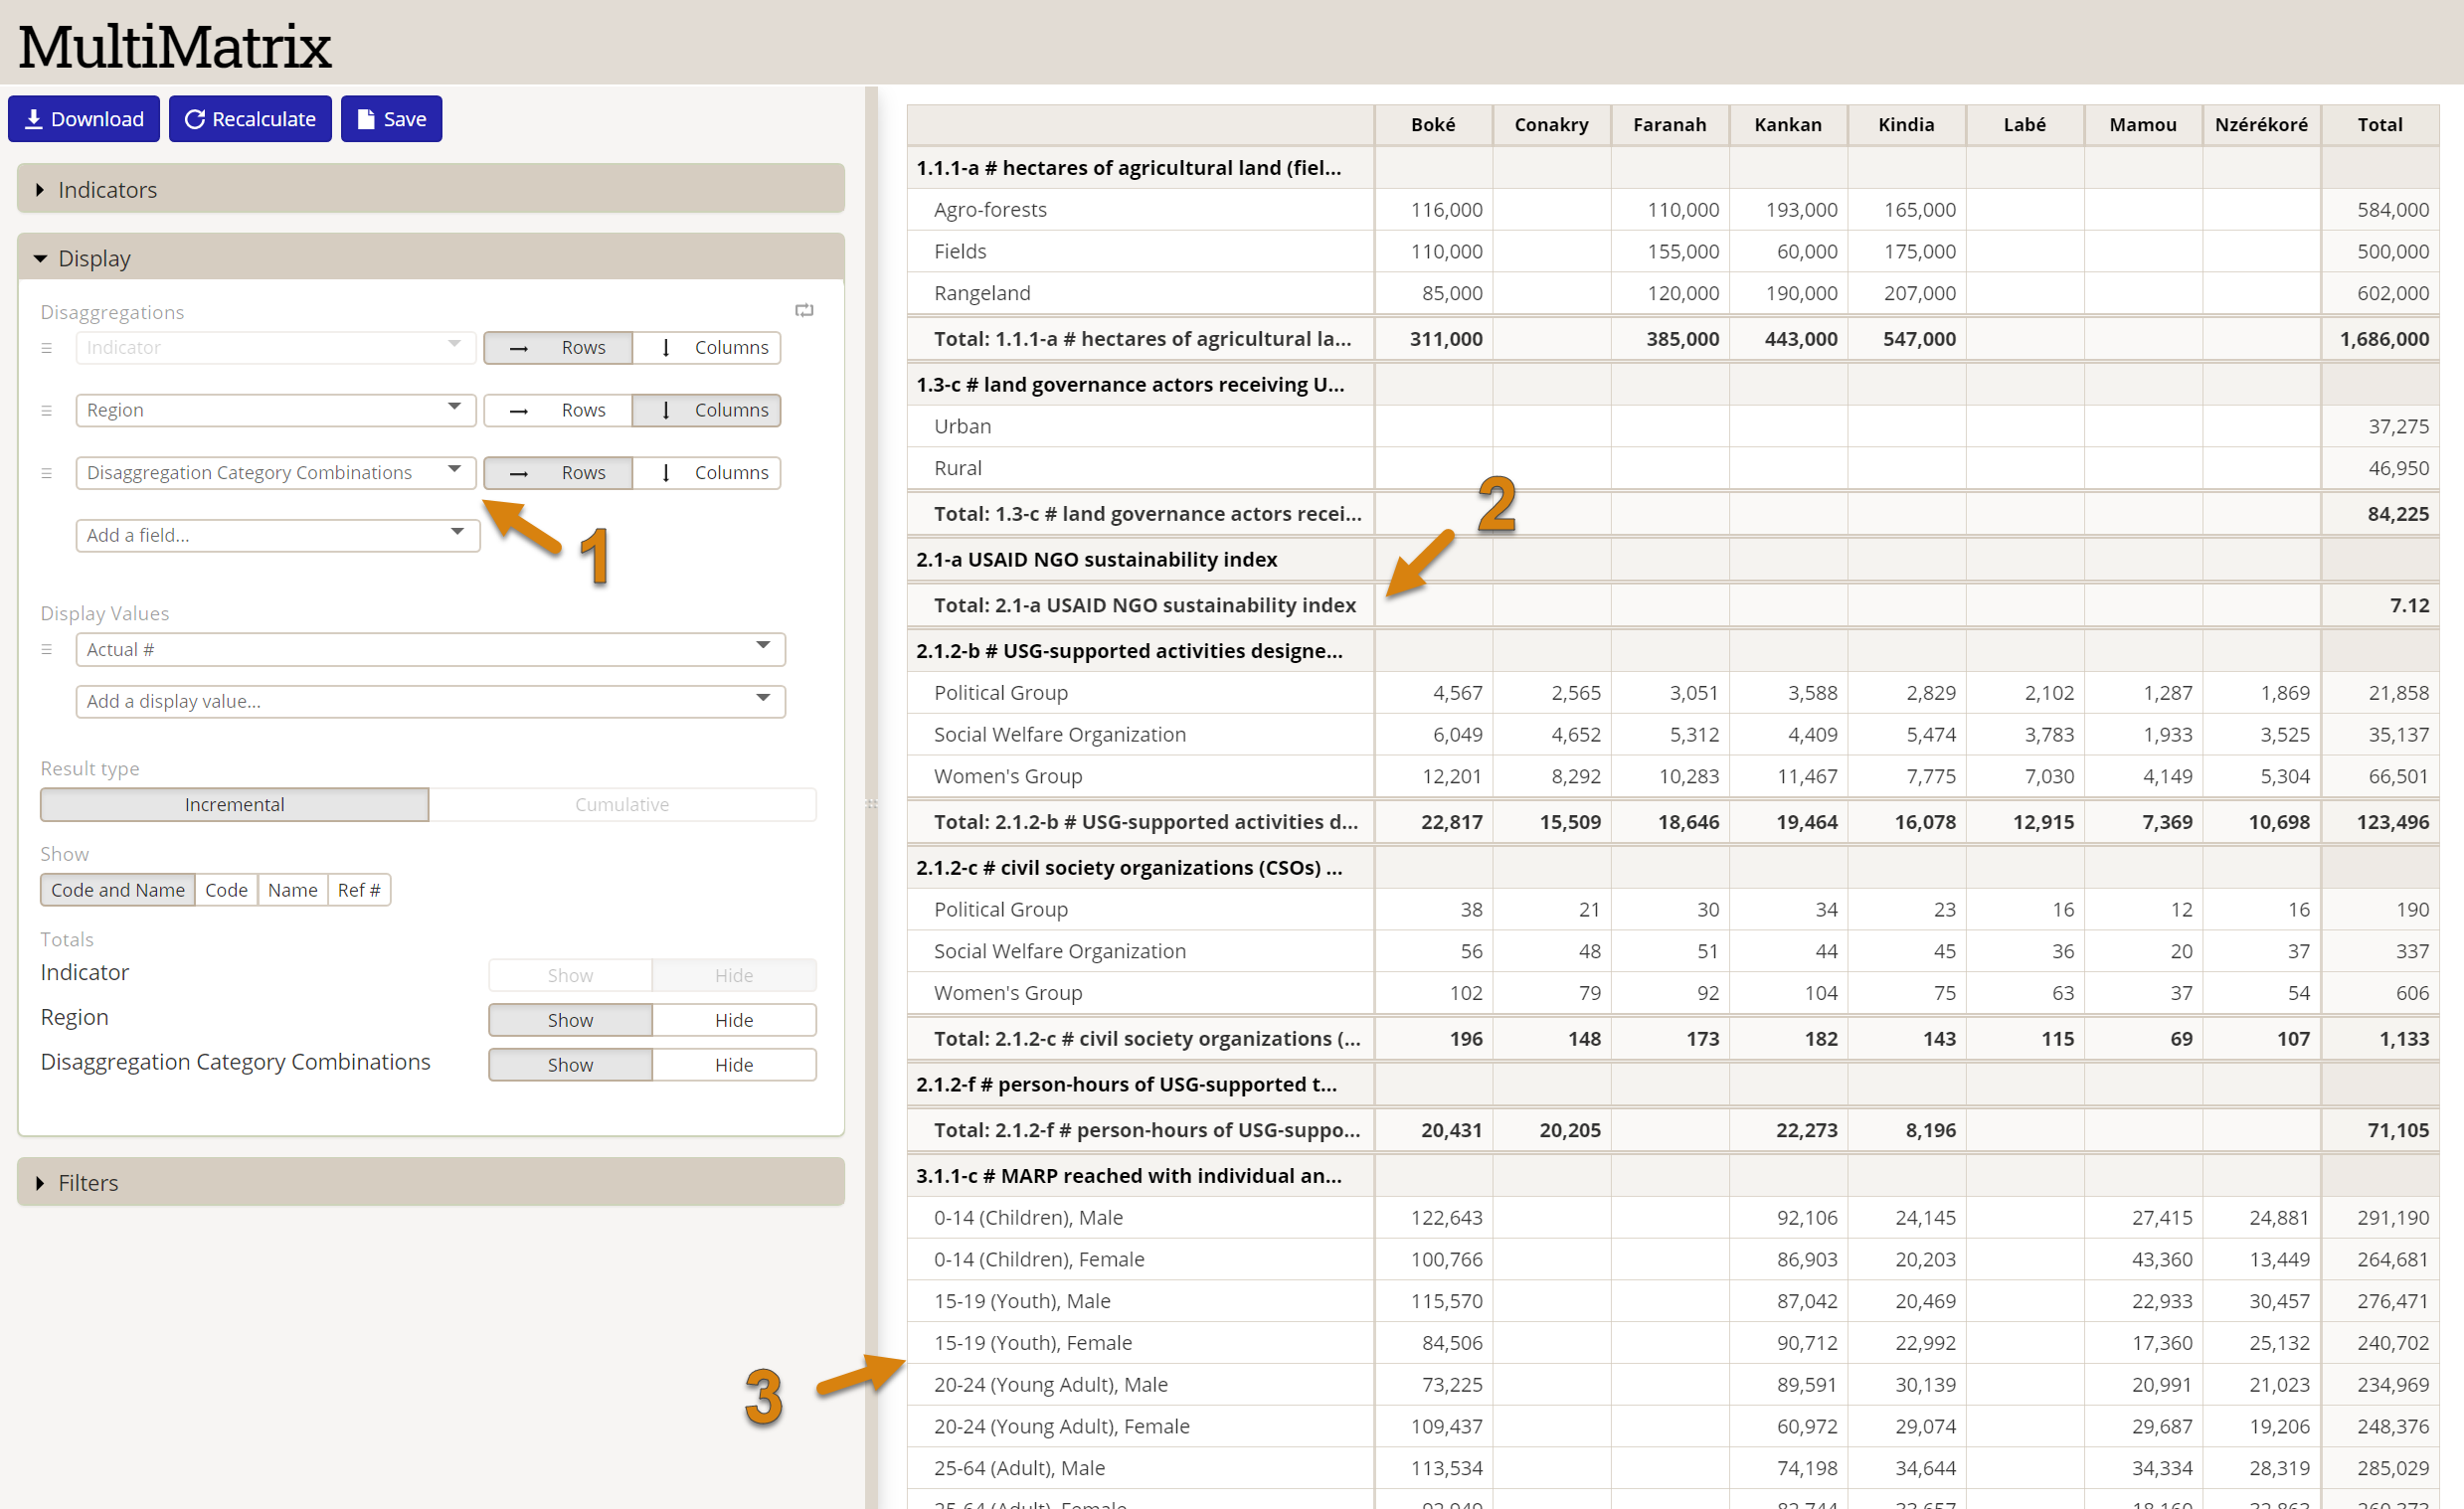 Screenshot showing Disaggregation Category Combination in action